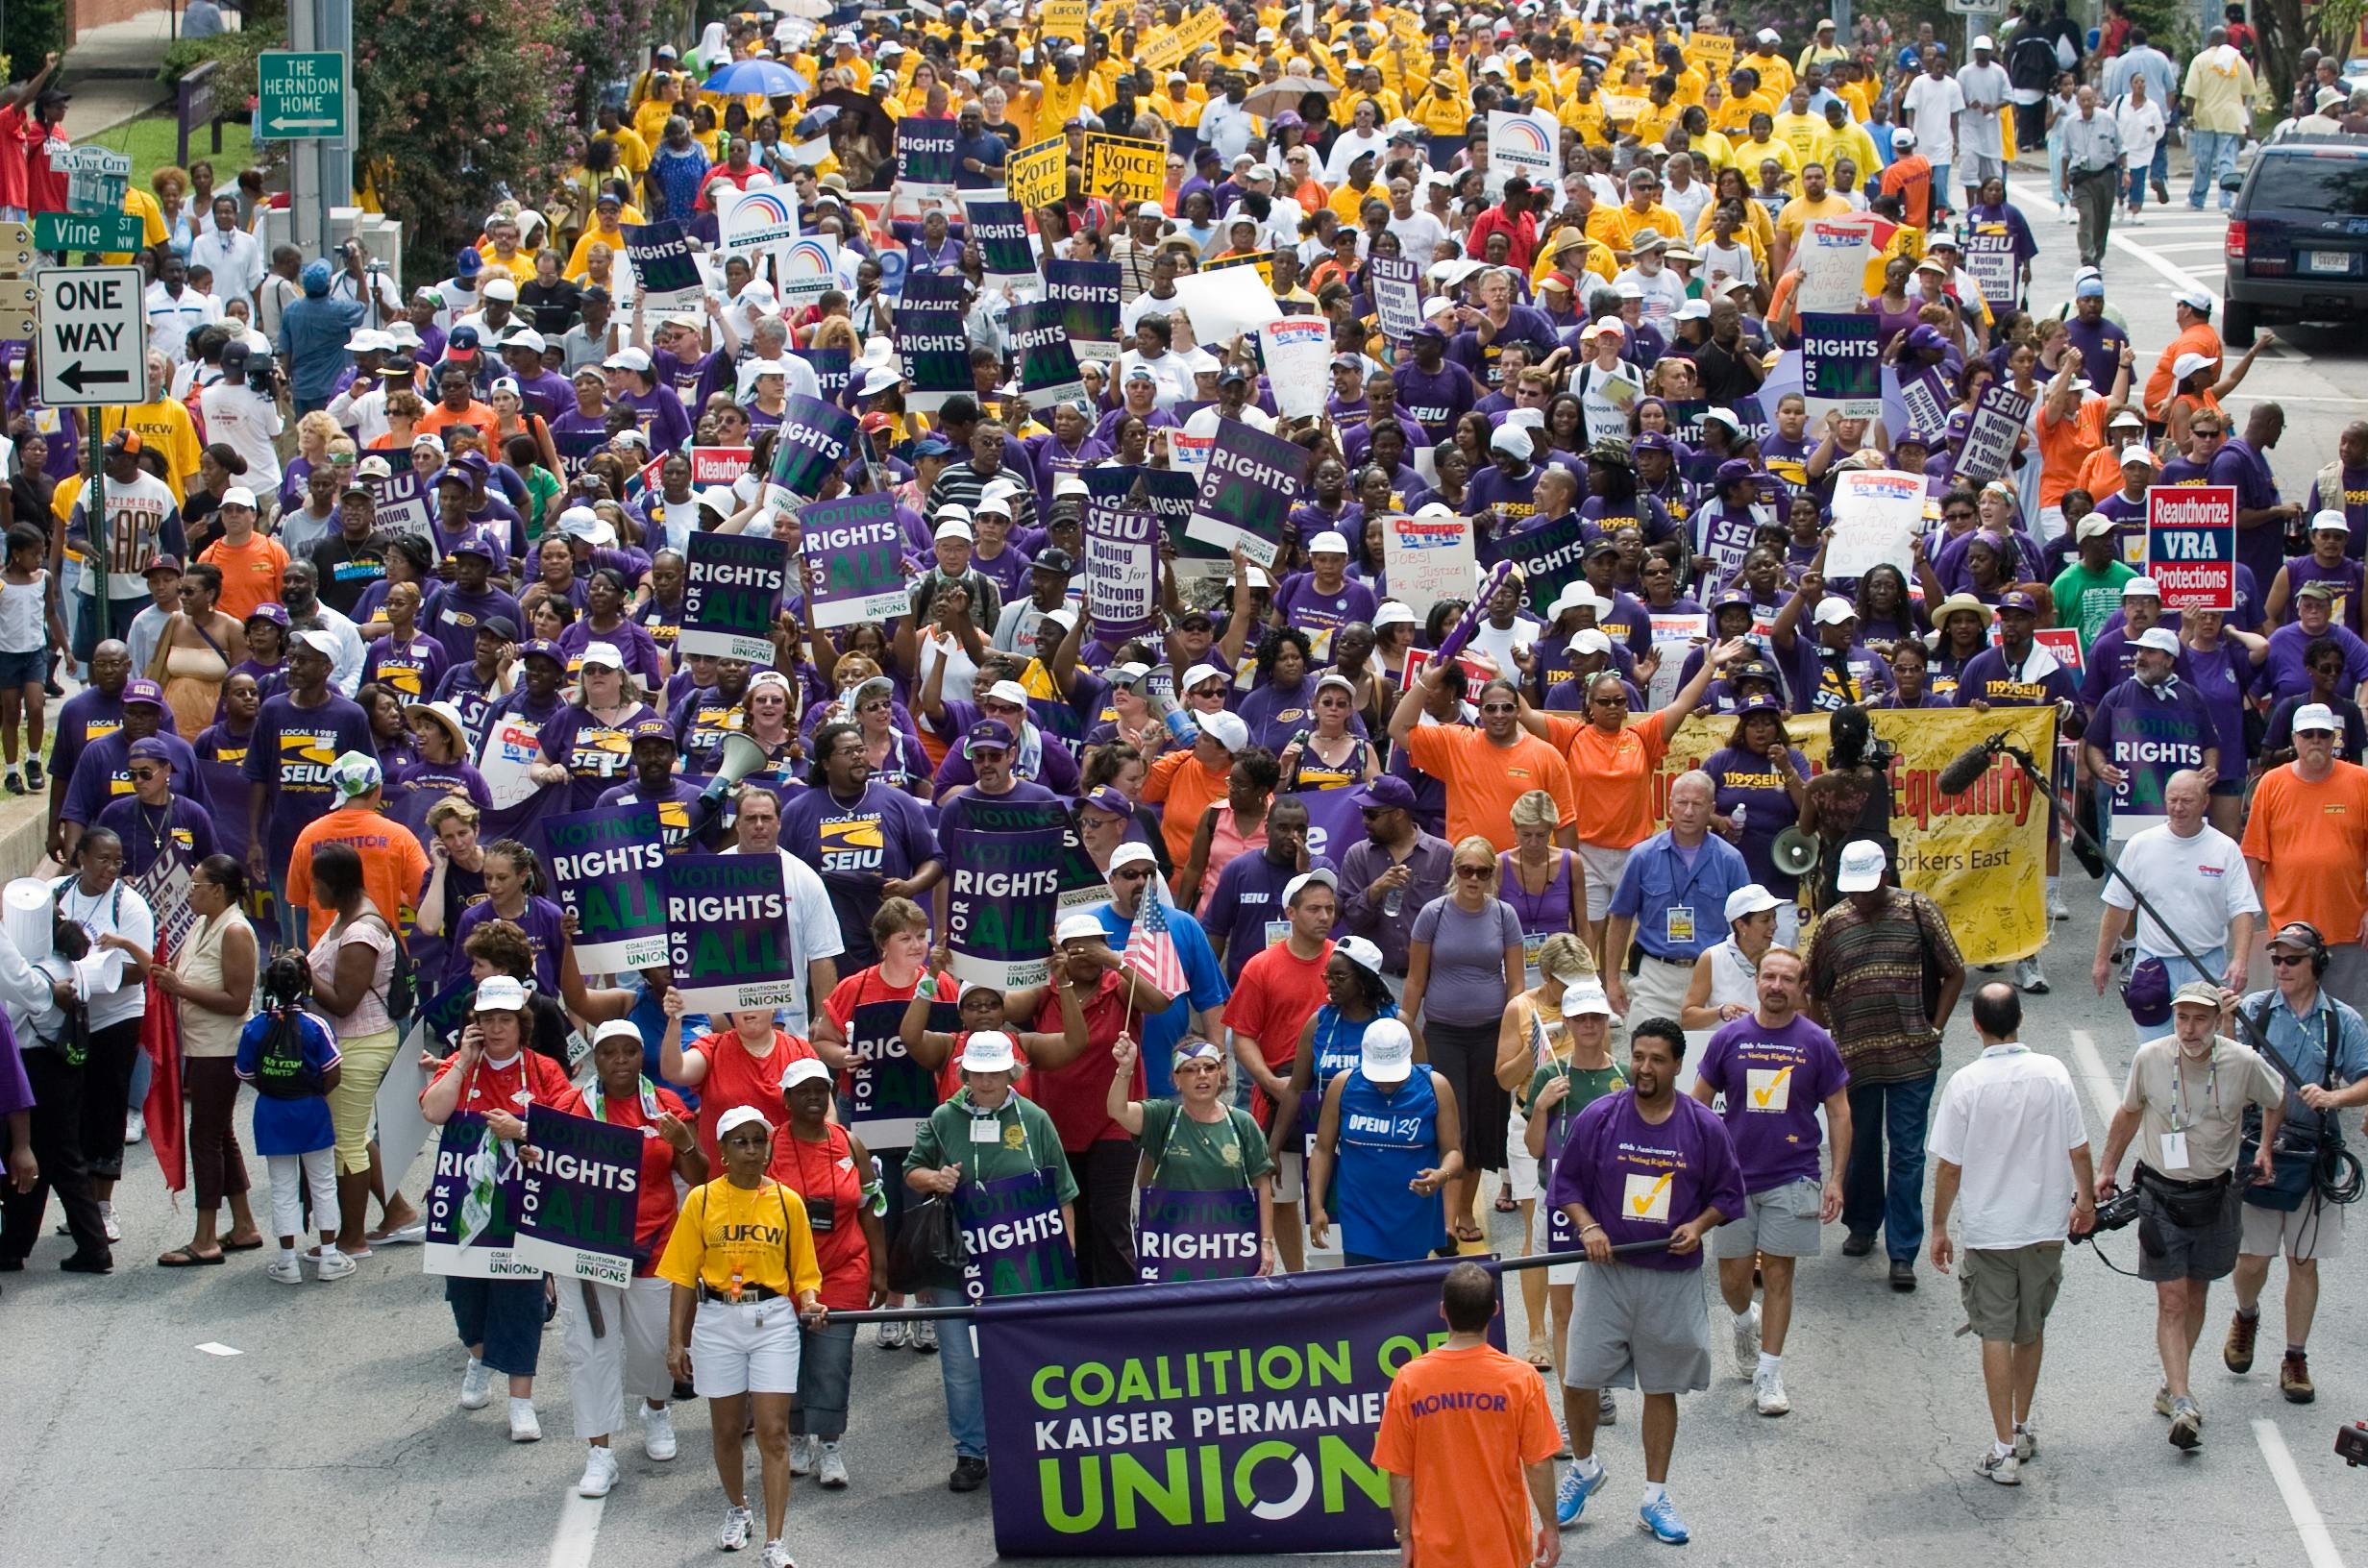 Union members marching for the 40th anniversary of the Voting Rights Act